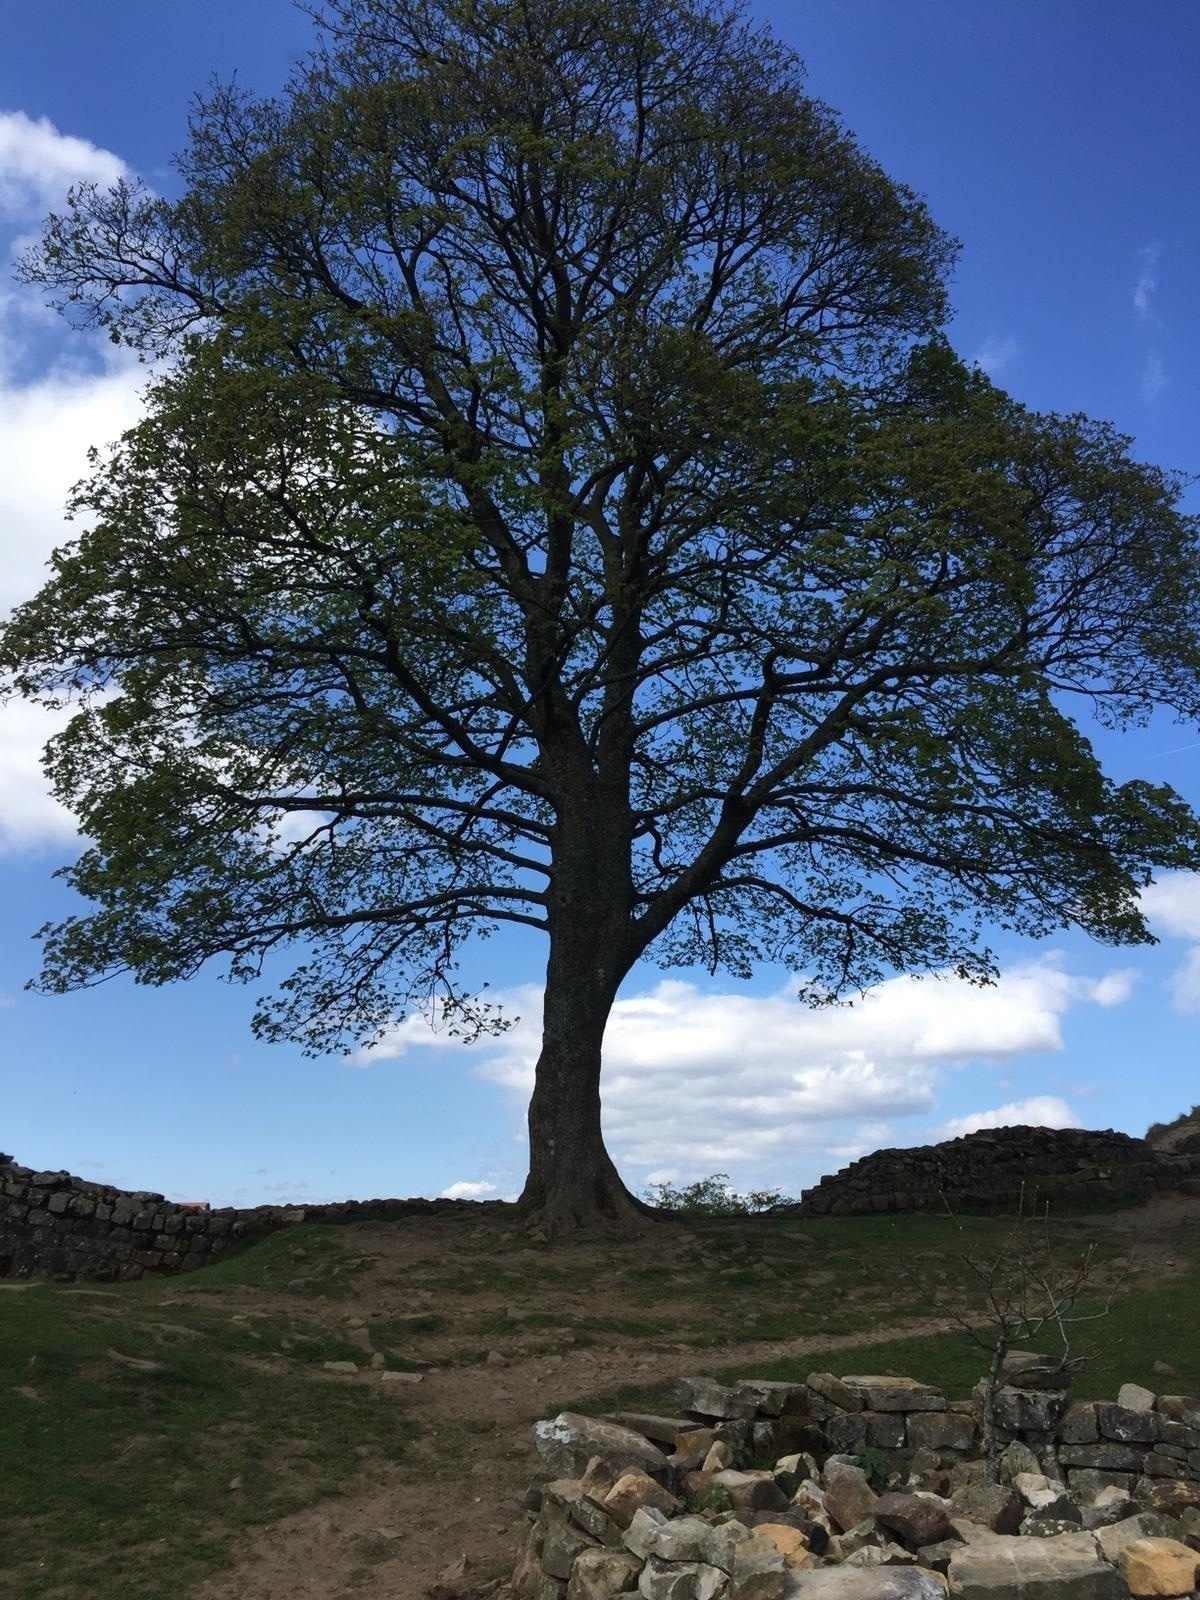 Sycamore tree on Hadrian’s Wall against a light blue sky dappled with cloud.